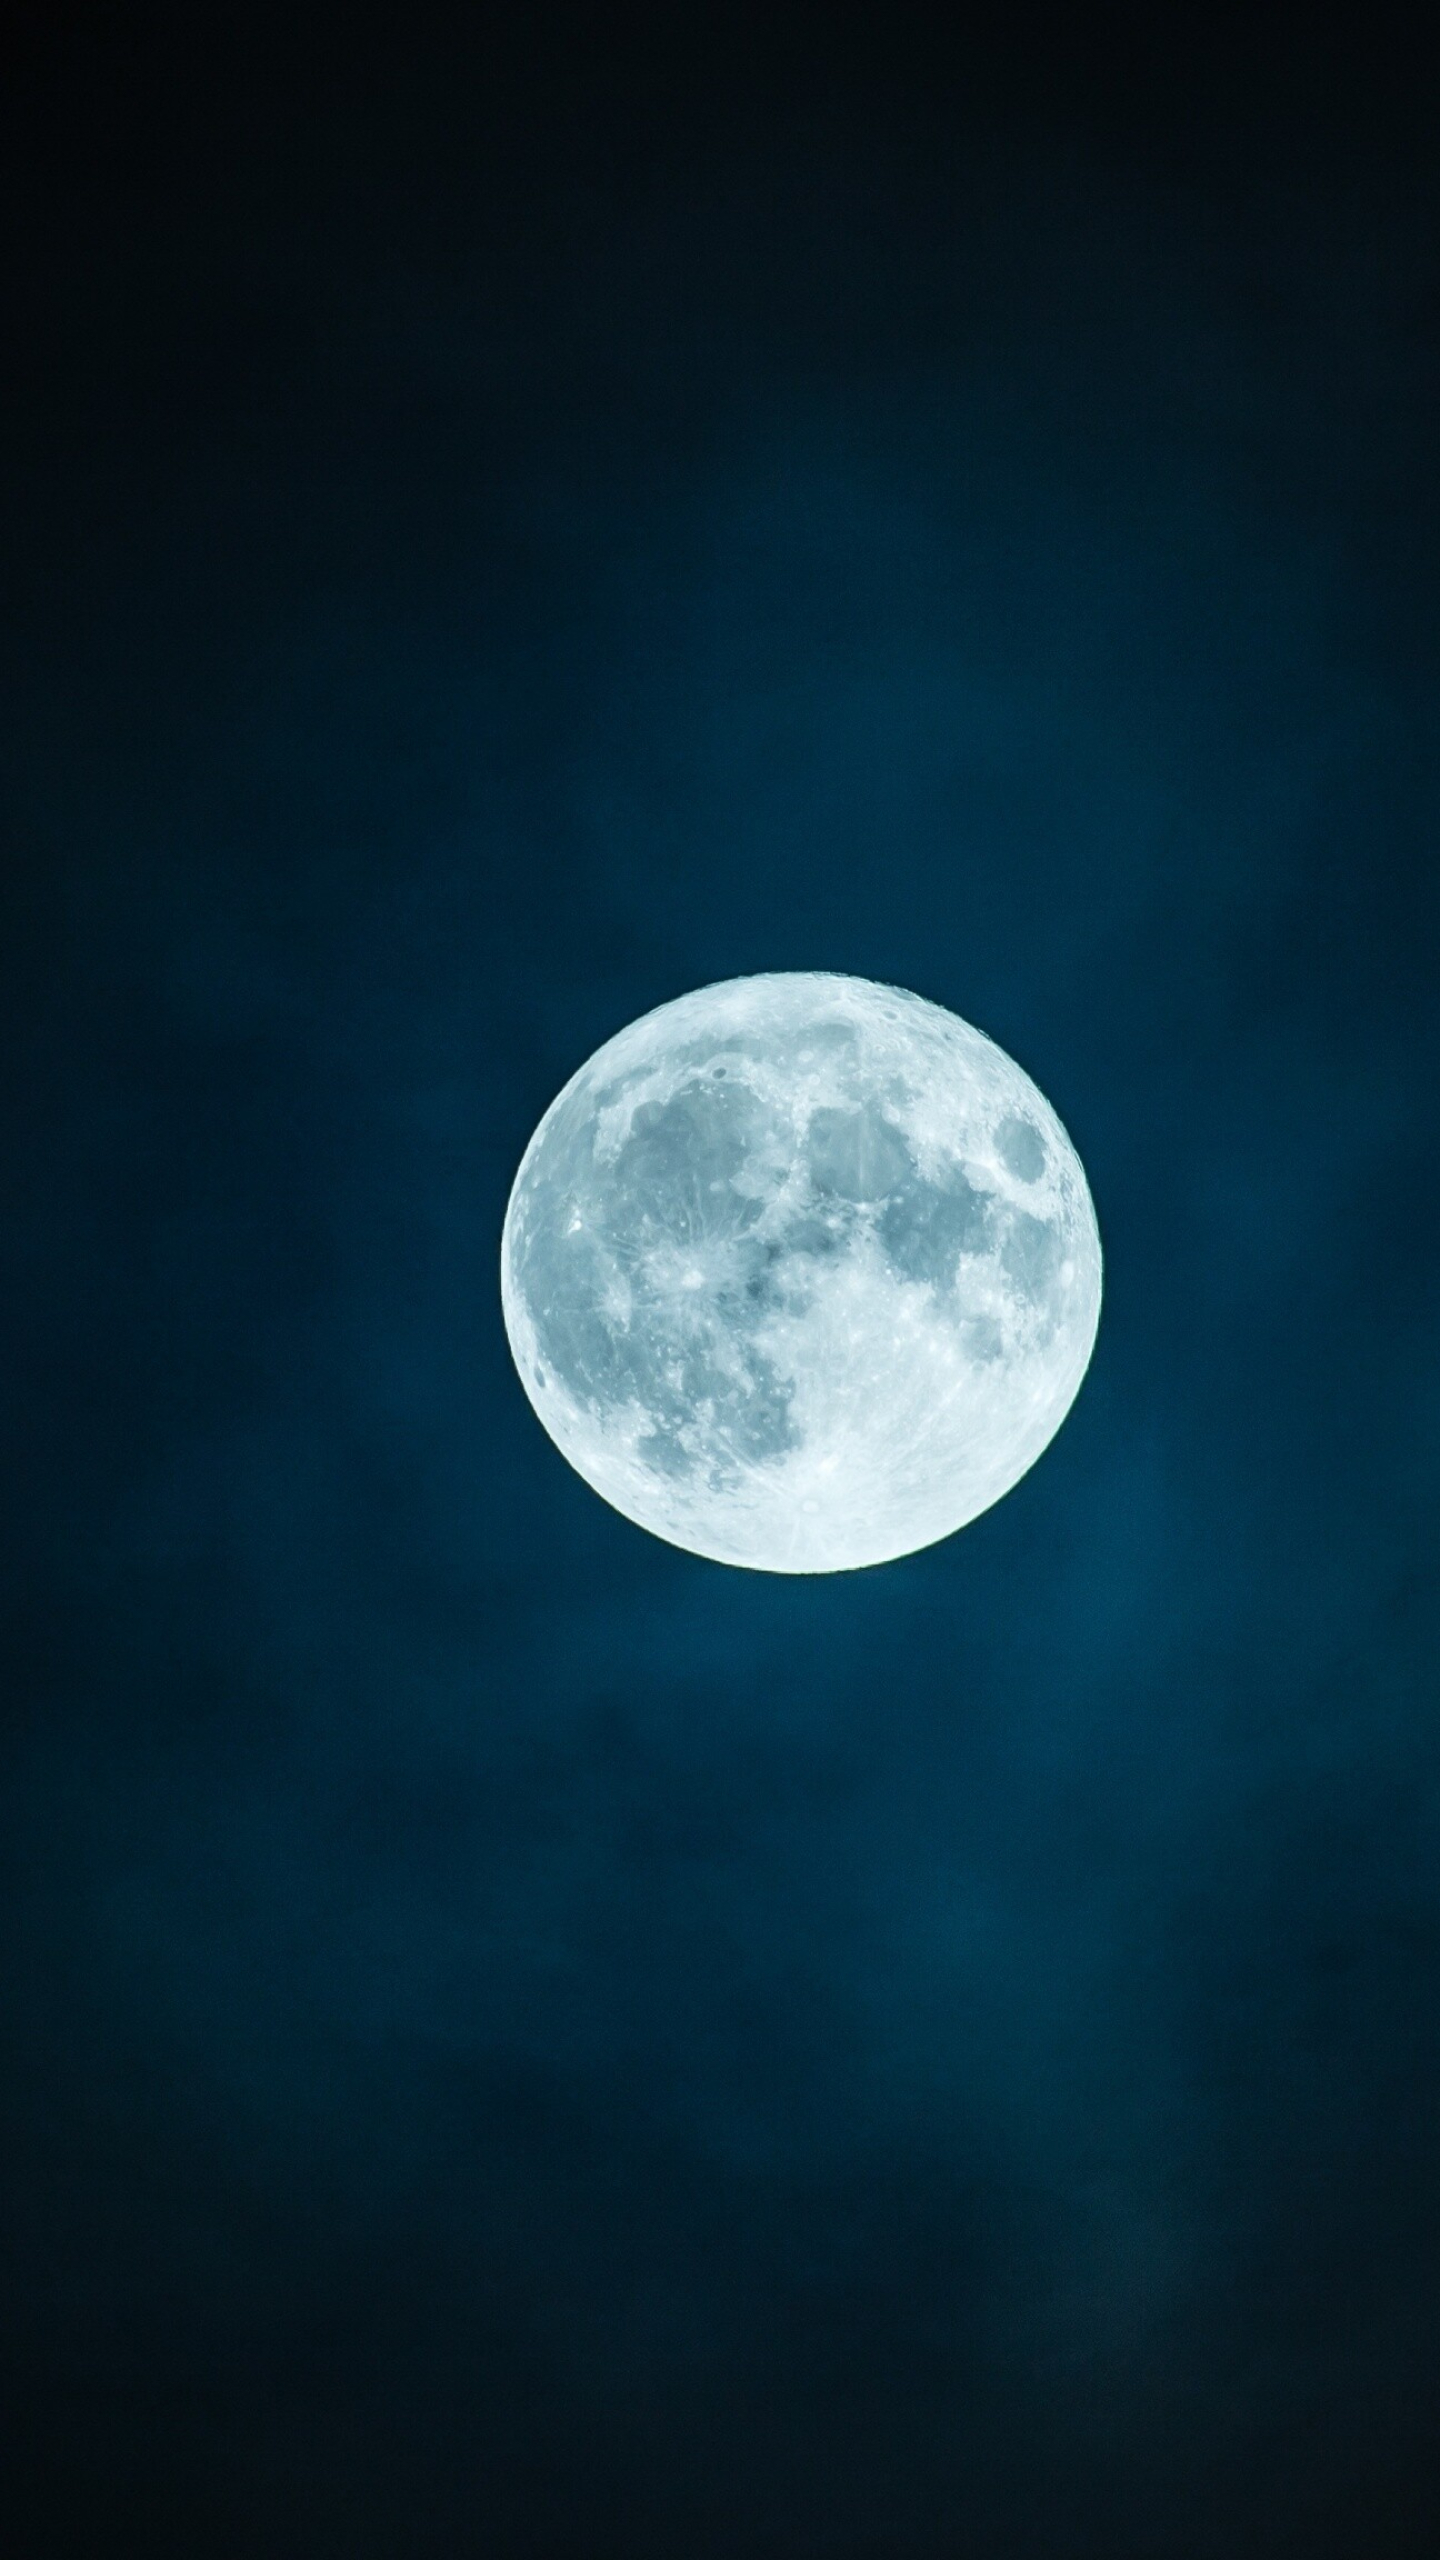 Moonlight: The full moon, Appears fully illuminated from Earth's perspective. 1440x2560 HD Wallpaper.